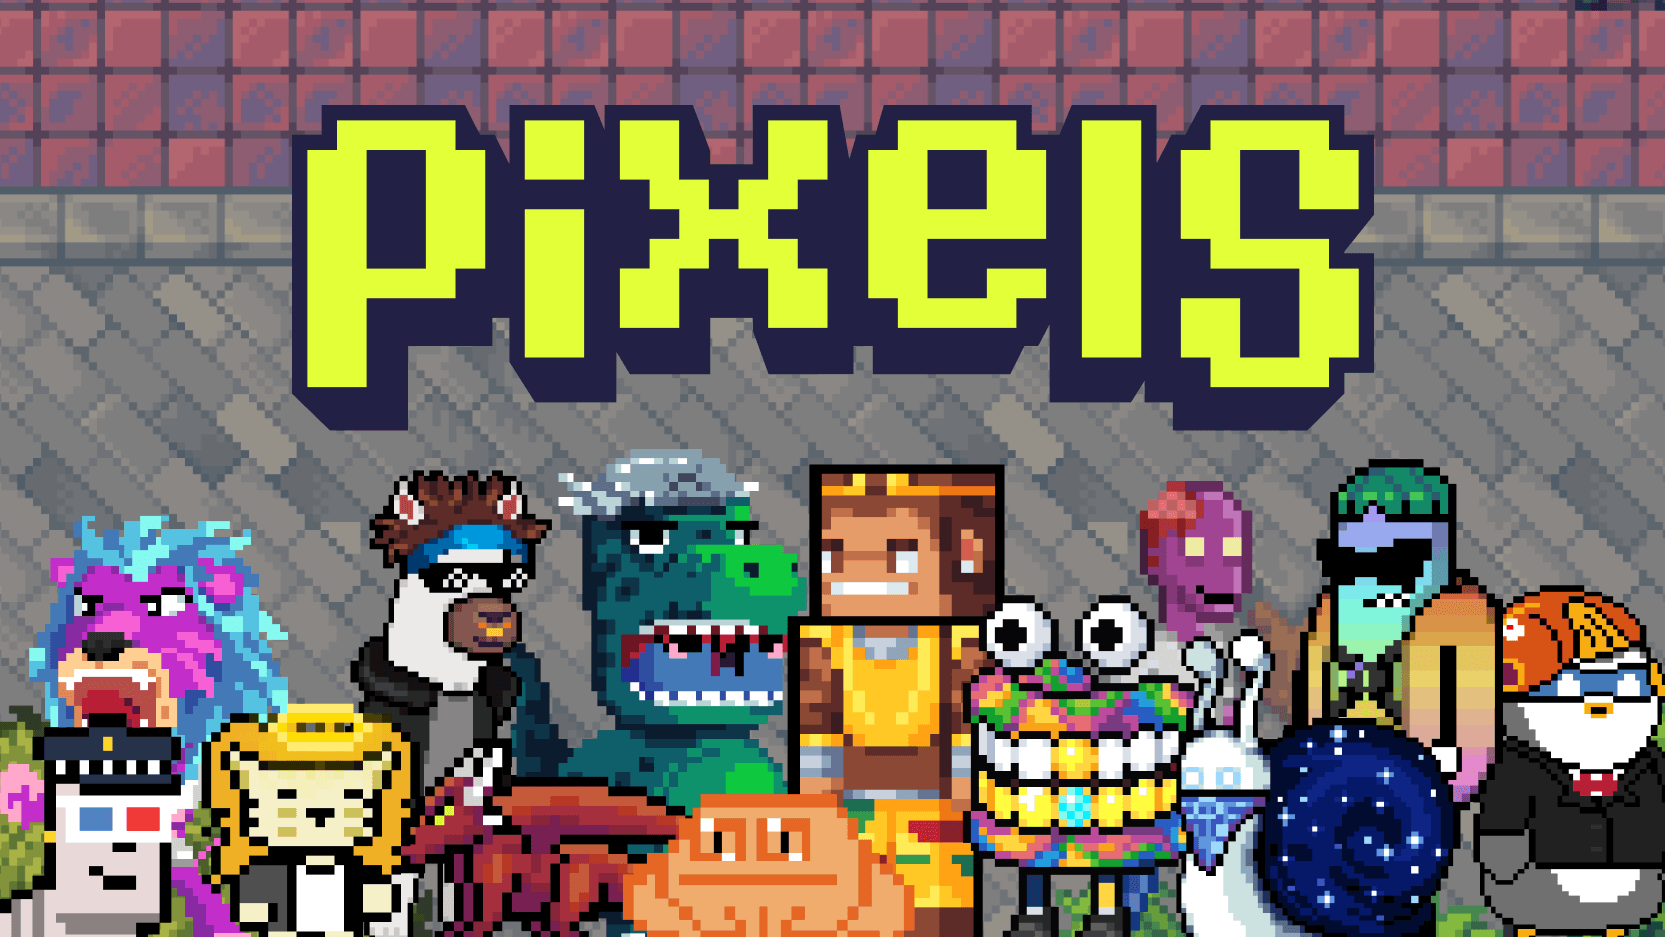 Pixels Migrates from Polygon to Join Ronin Network